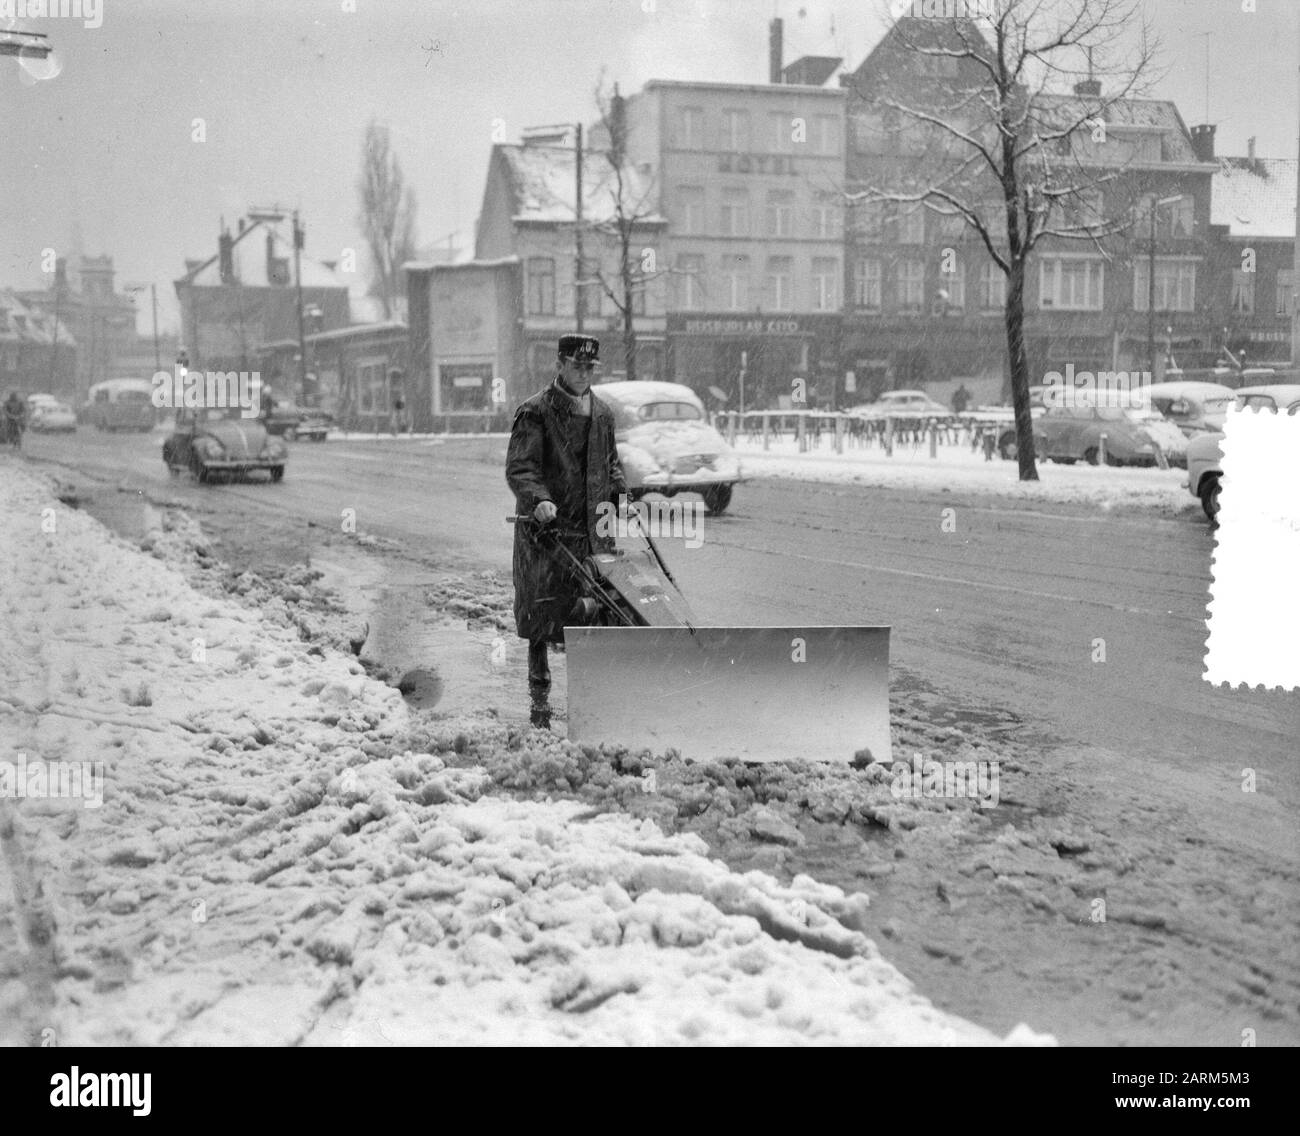 Heavy snowfall in Eindhoven Date: February 20, 1957 Location: Eindhoven Keywords: snowfall Stock Photo